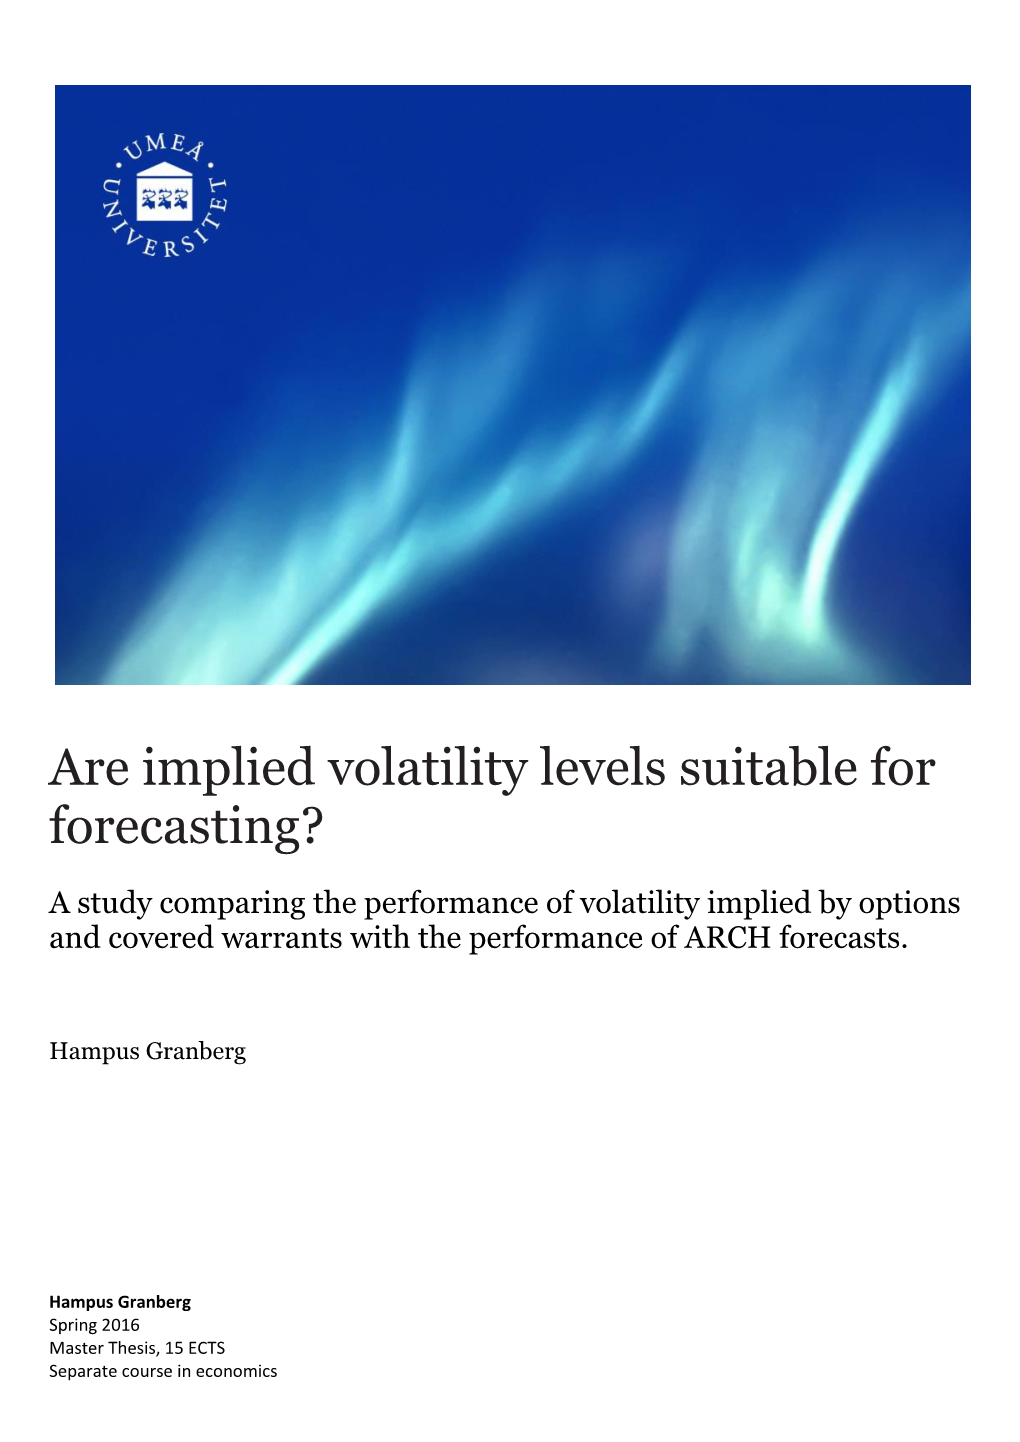 Are Implied Volatility Levels Suitable for Forecasting?